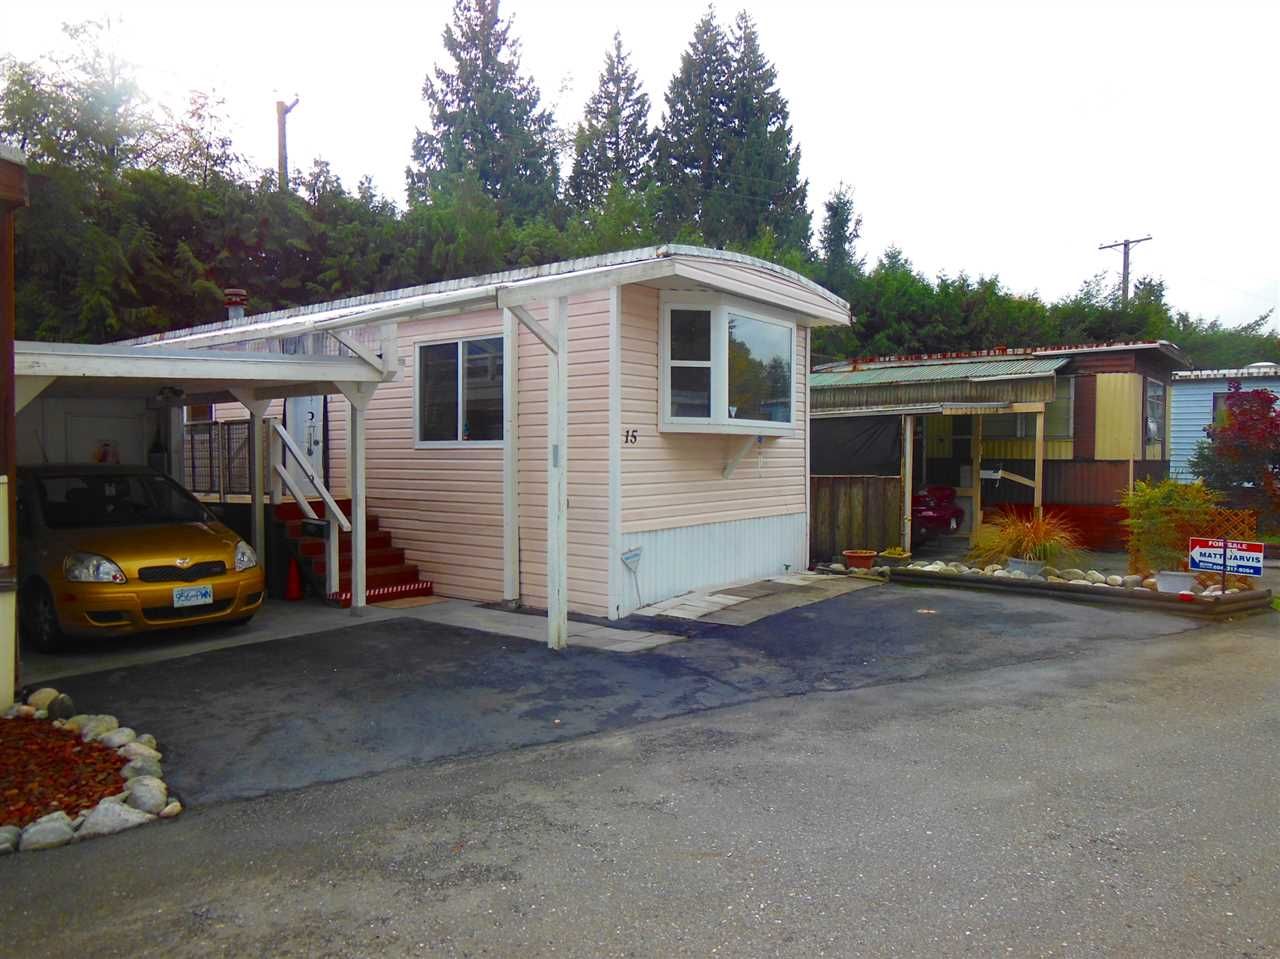 Main Photo: 15 4200 DEWDNEY TRUNK ROAD in Coquitlam: Ranch Park Manufactured Home for sale : MLS®# R2013256